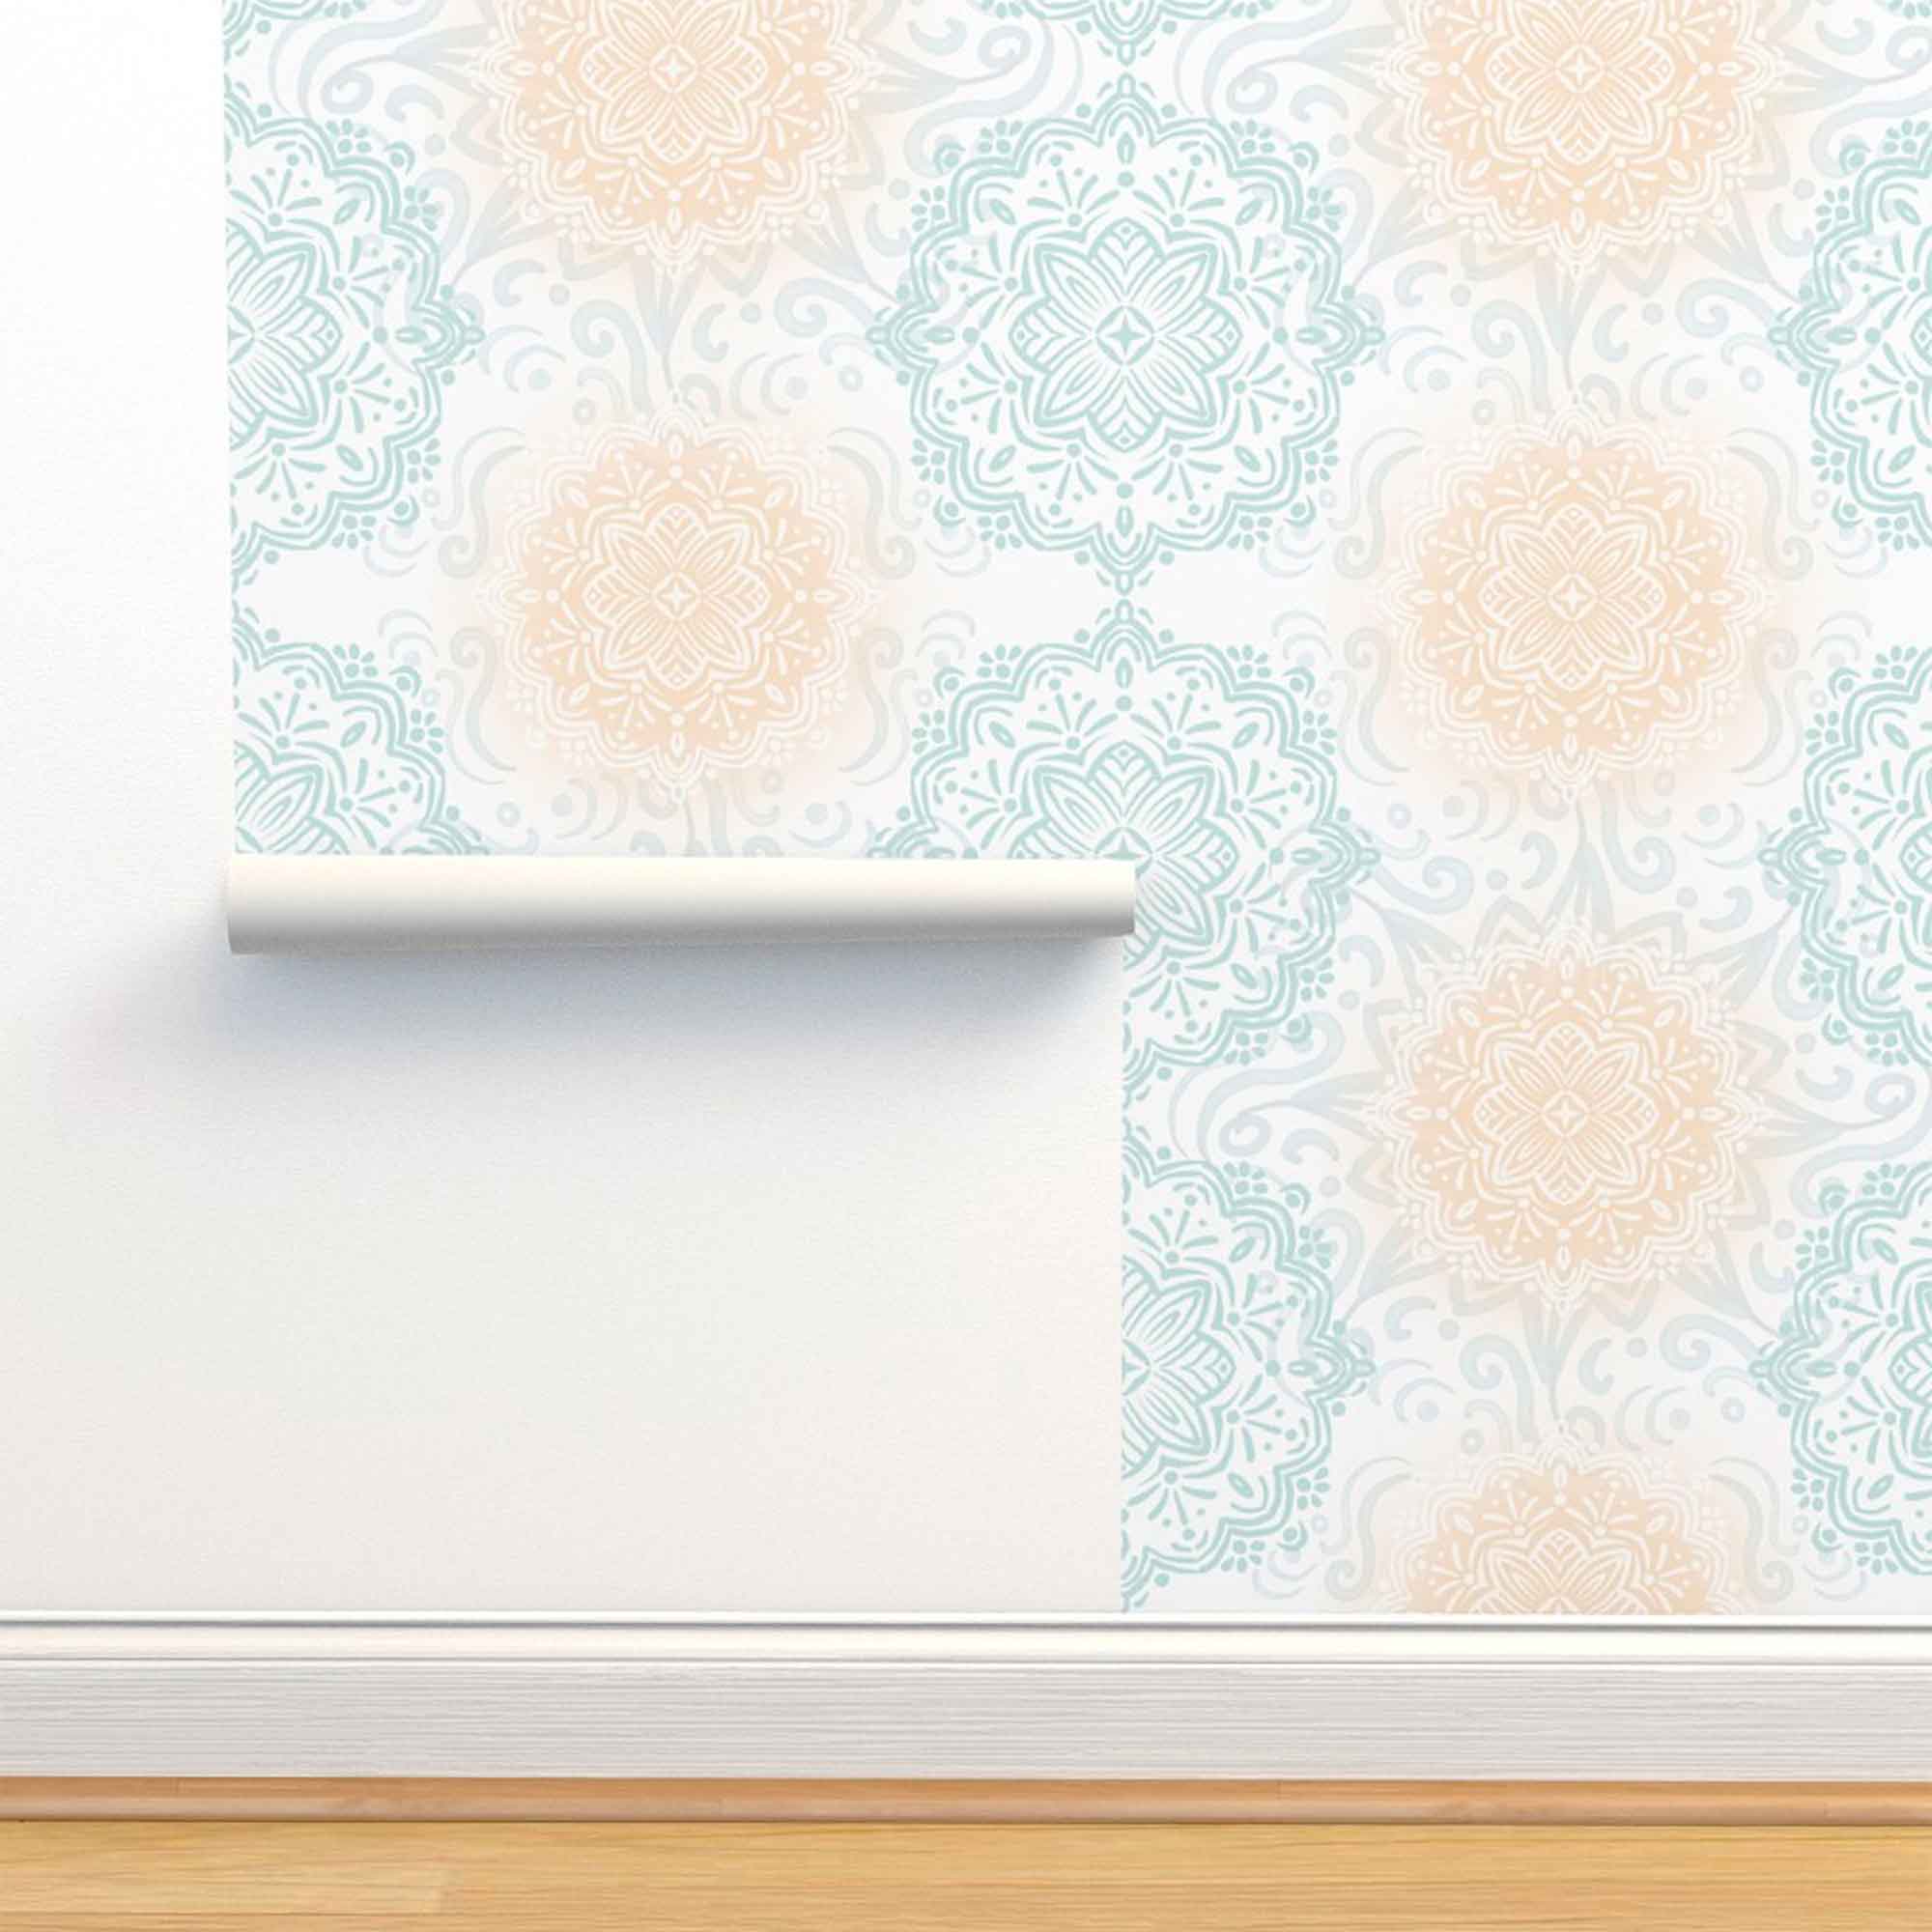 Boho Hand-drawn Mandalas in Pastel Aqua and Peach Removable Peel & Stick and Pre-Pasted Wallpaper Roll Width